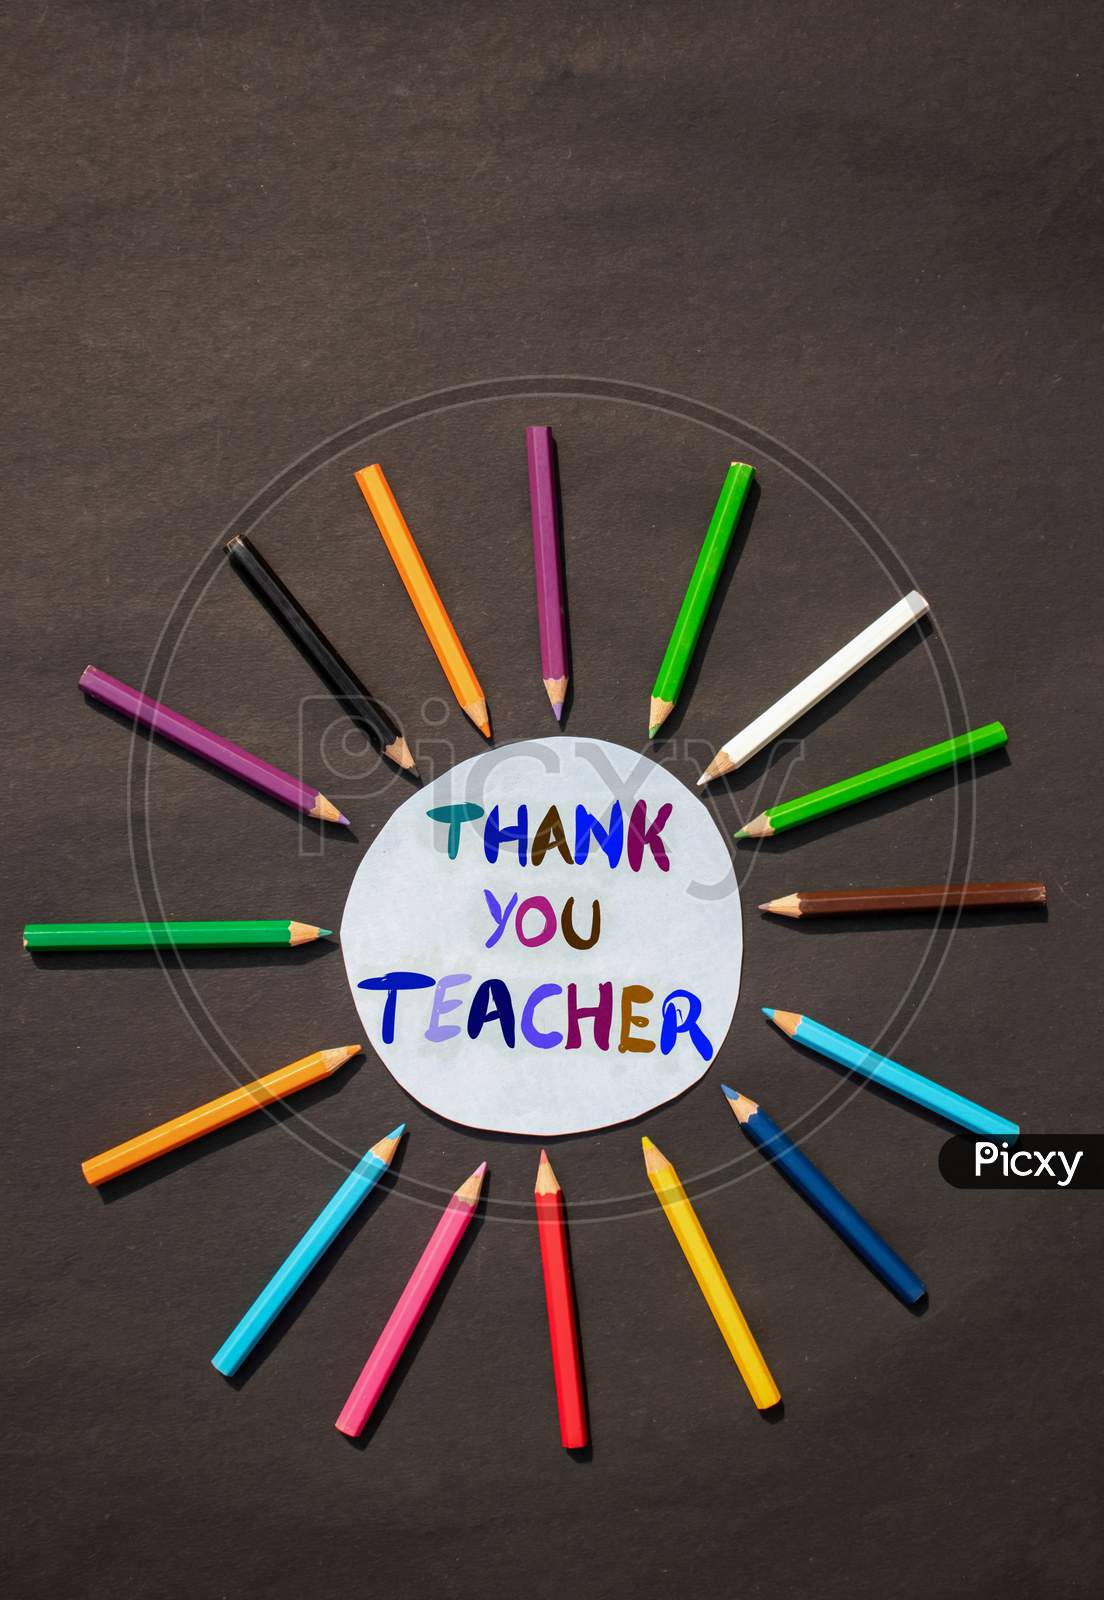 Thank You Teacher Creative Photo With Color Pencils In Vertical Orientation